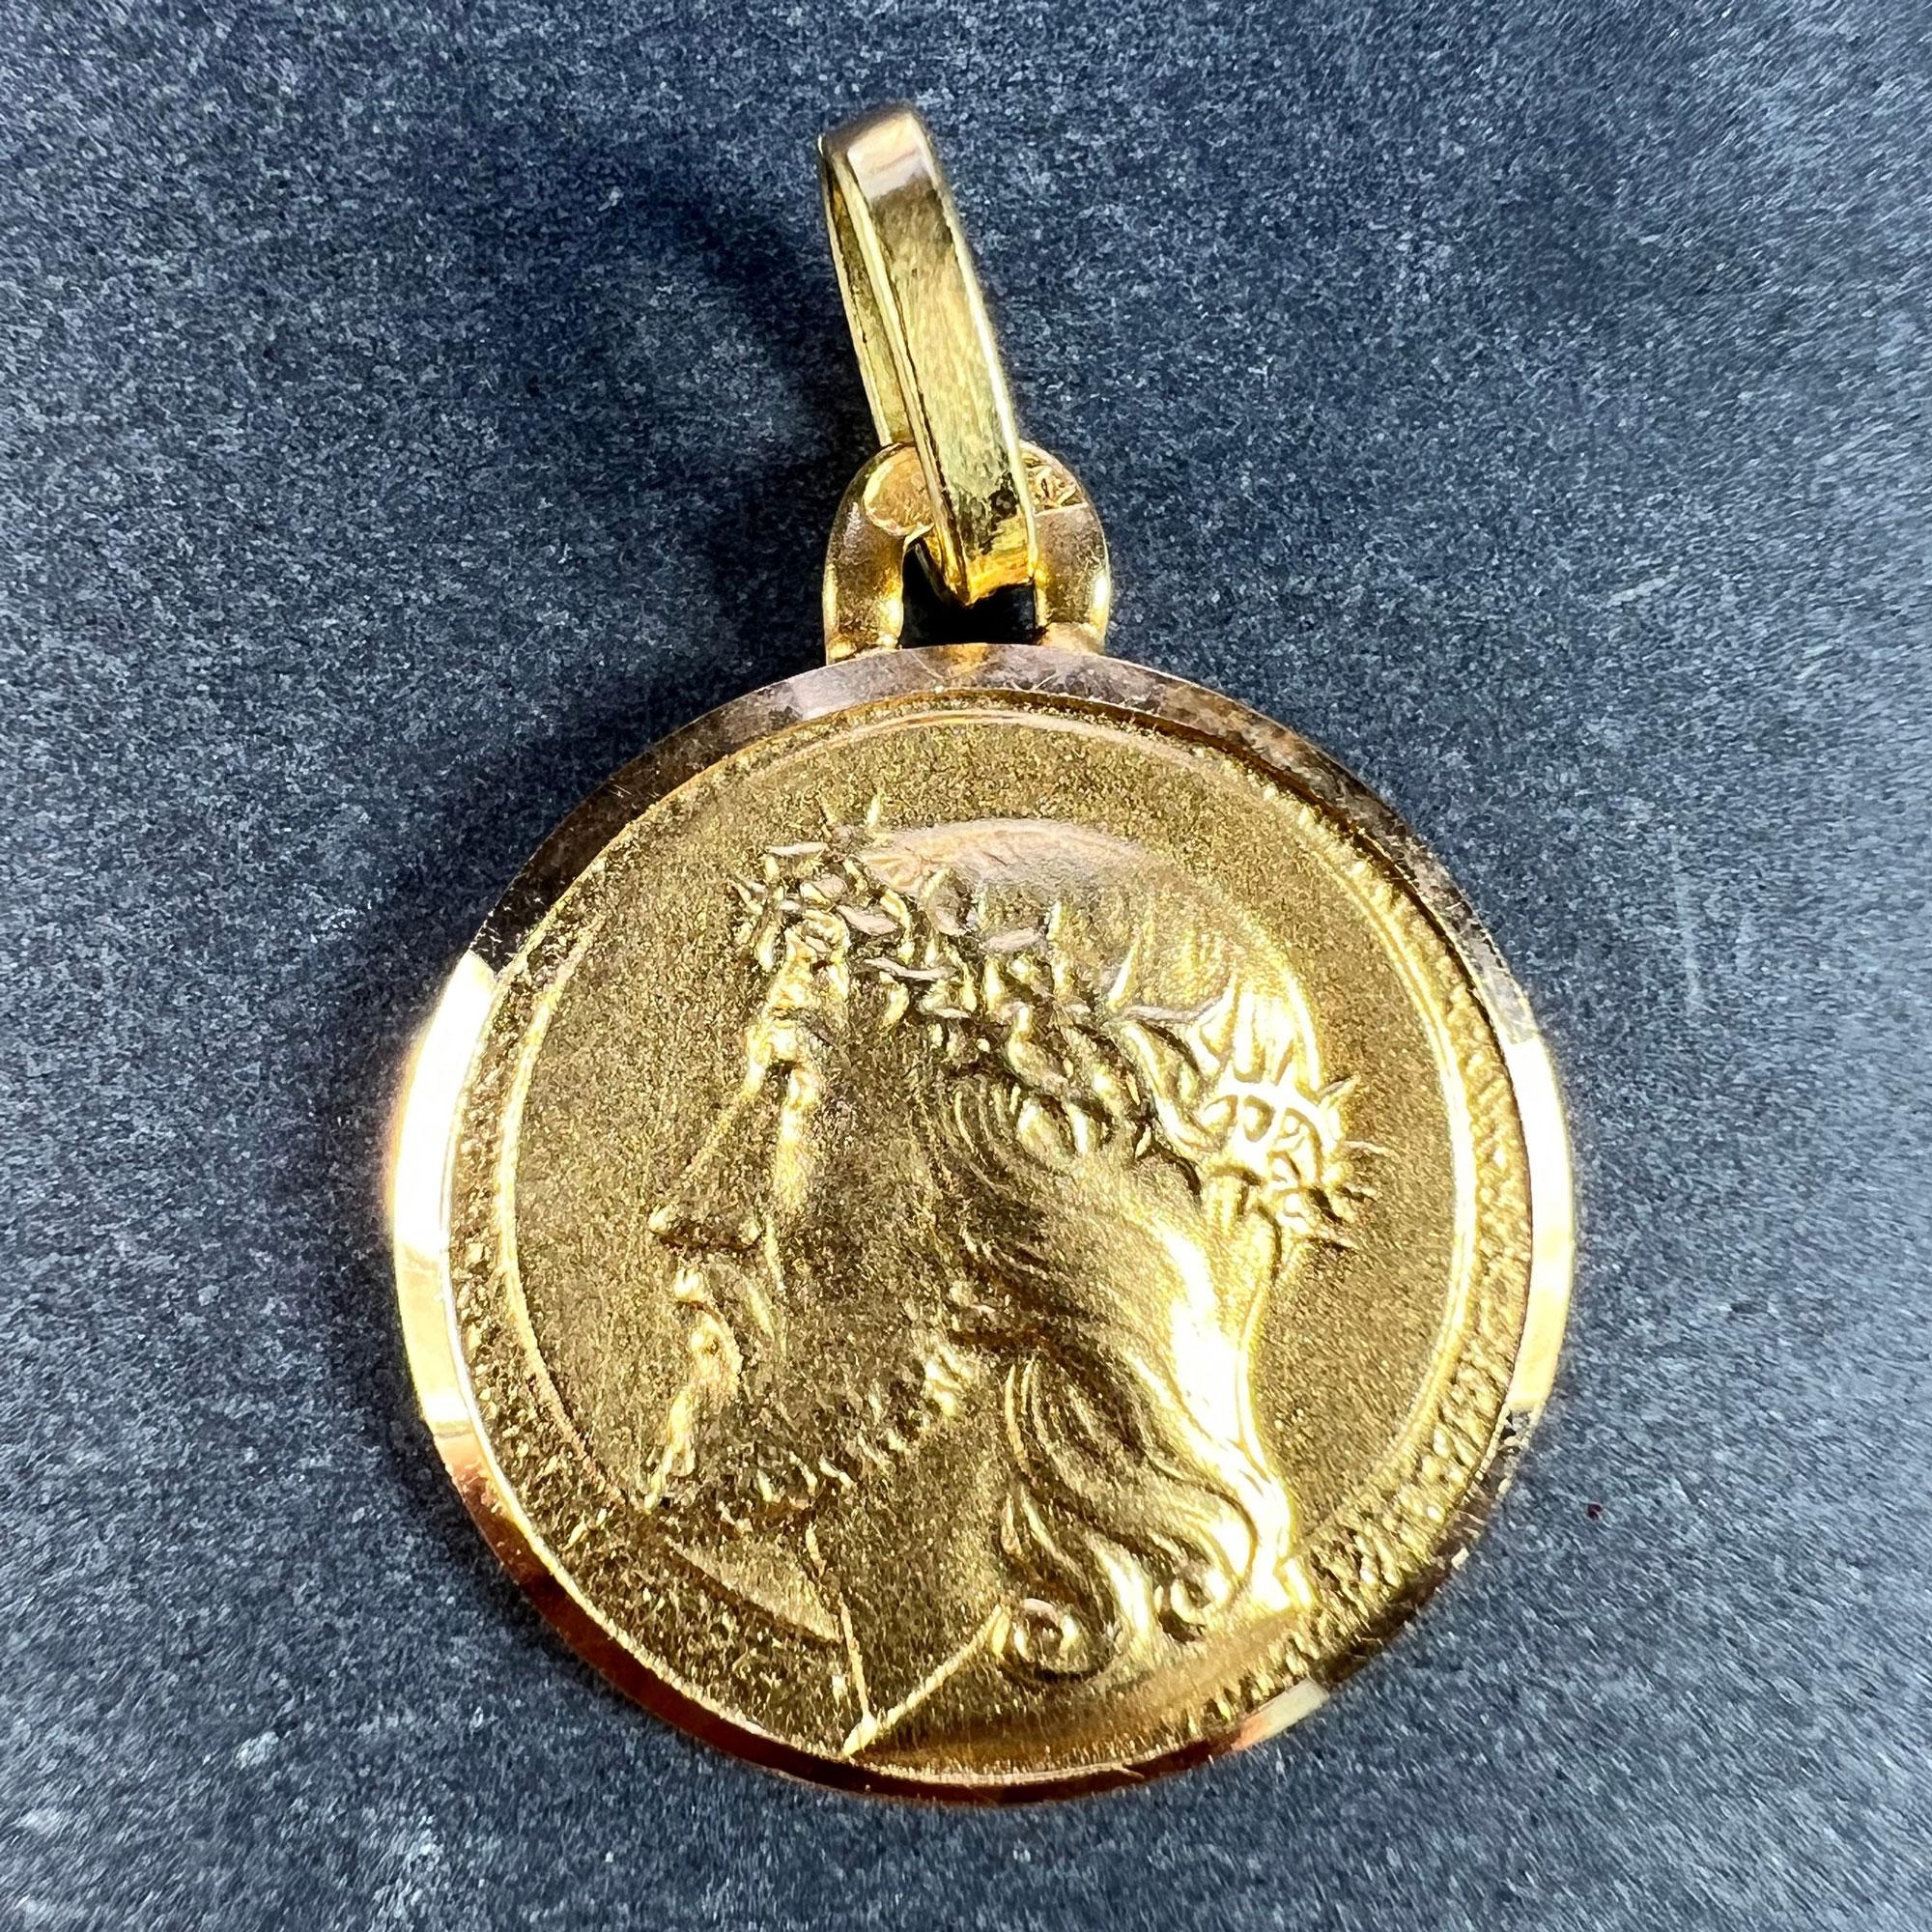 A French 18 karat (18K) yellow gold charm pendant designed as a round medal depicting the profile of Christ wearing the Crown of Thorns, with a halo surrounding him. Stamped with the eagle’s head for 18 karat gold and French manufacture, along with